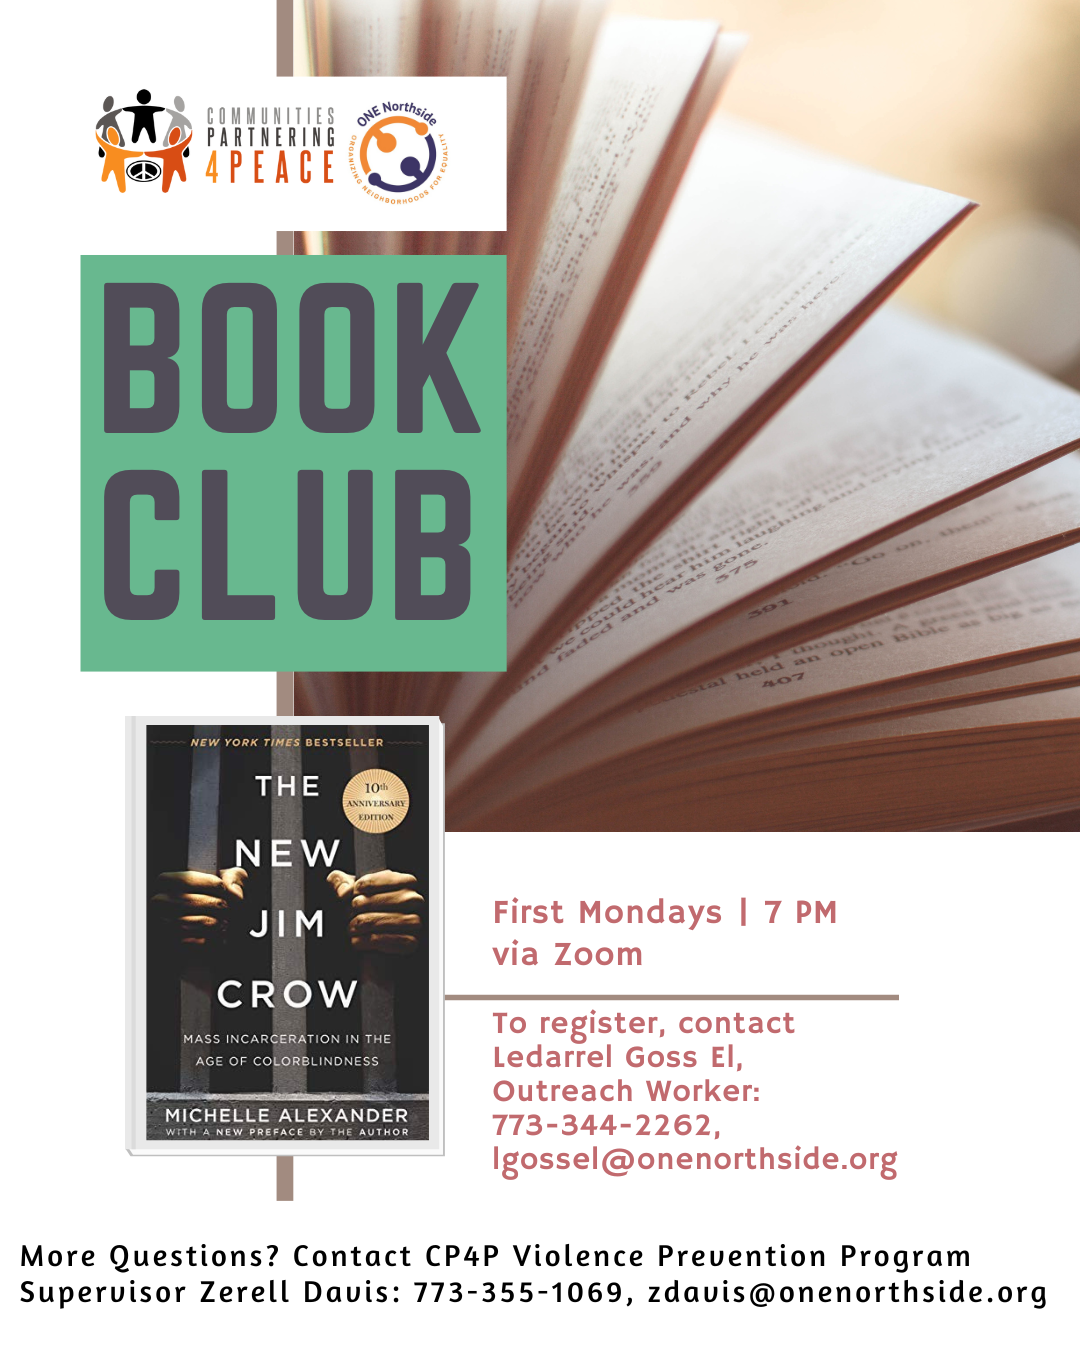 CP4P book club, first mondays at 7pm